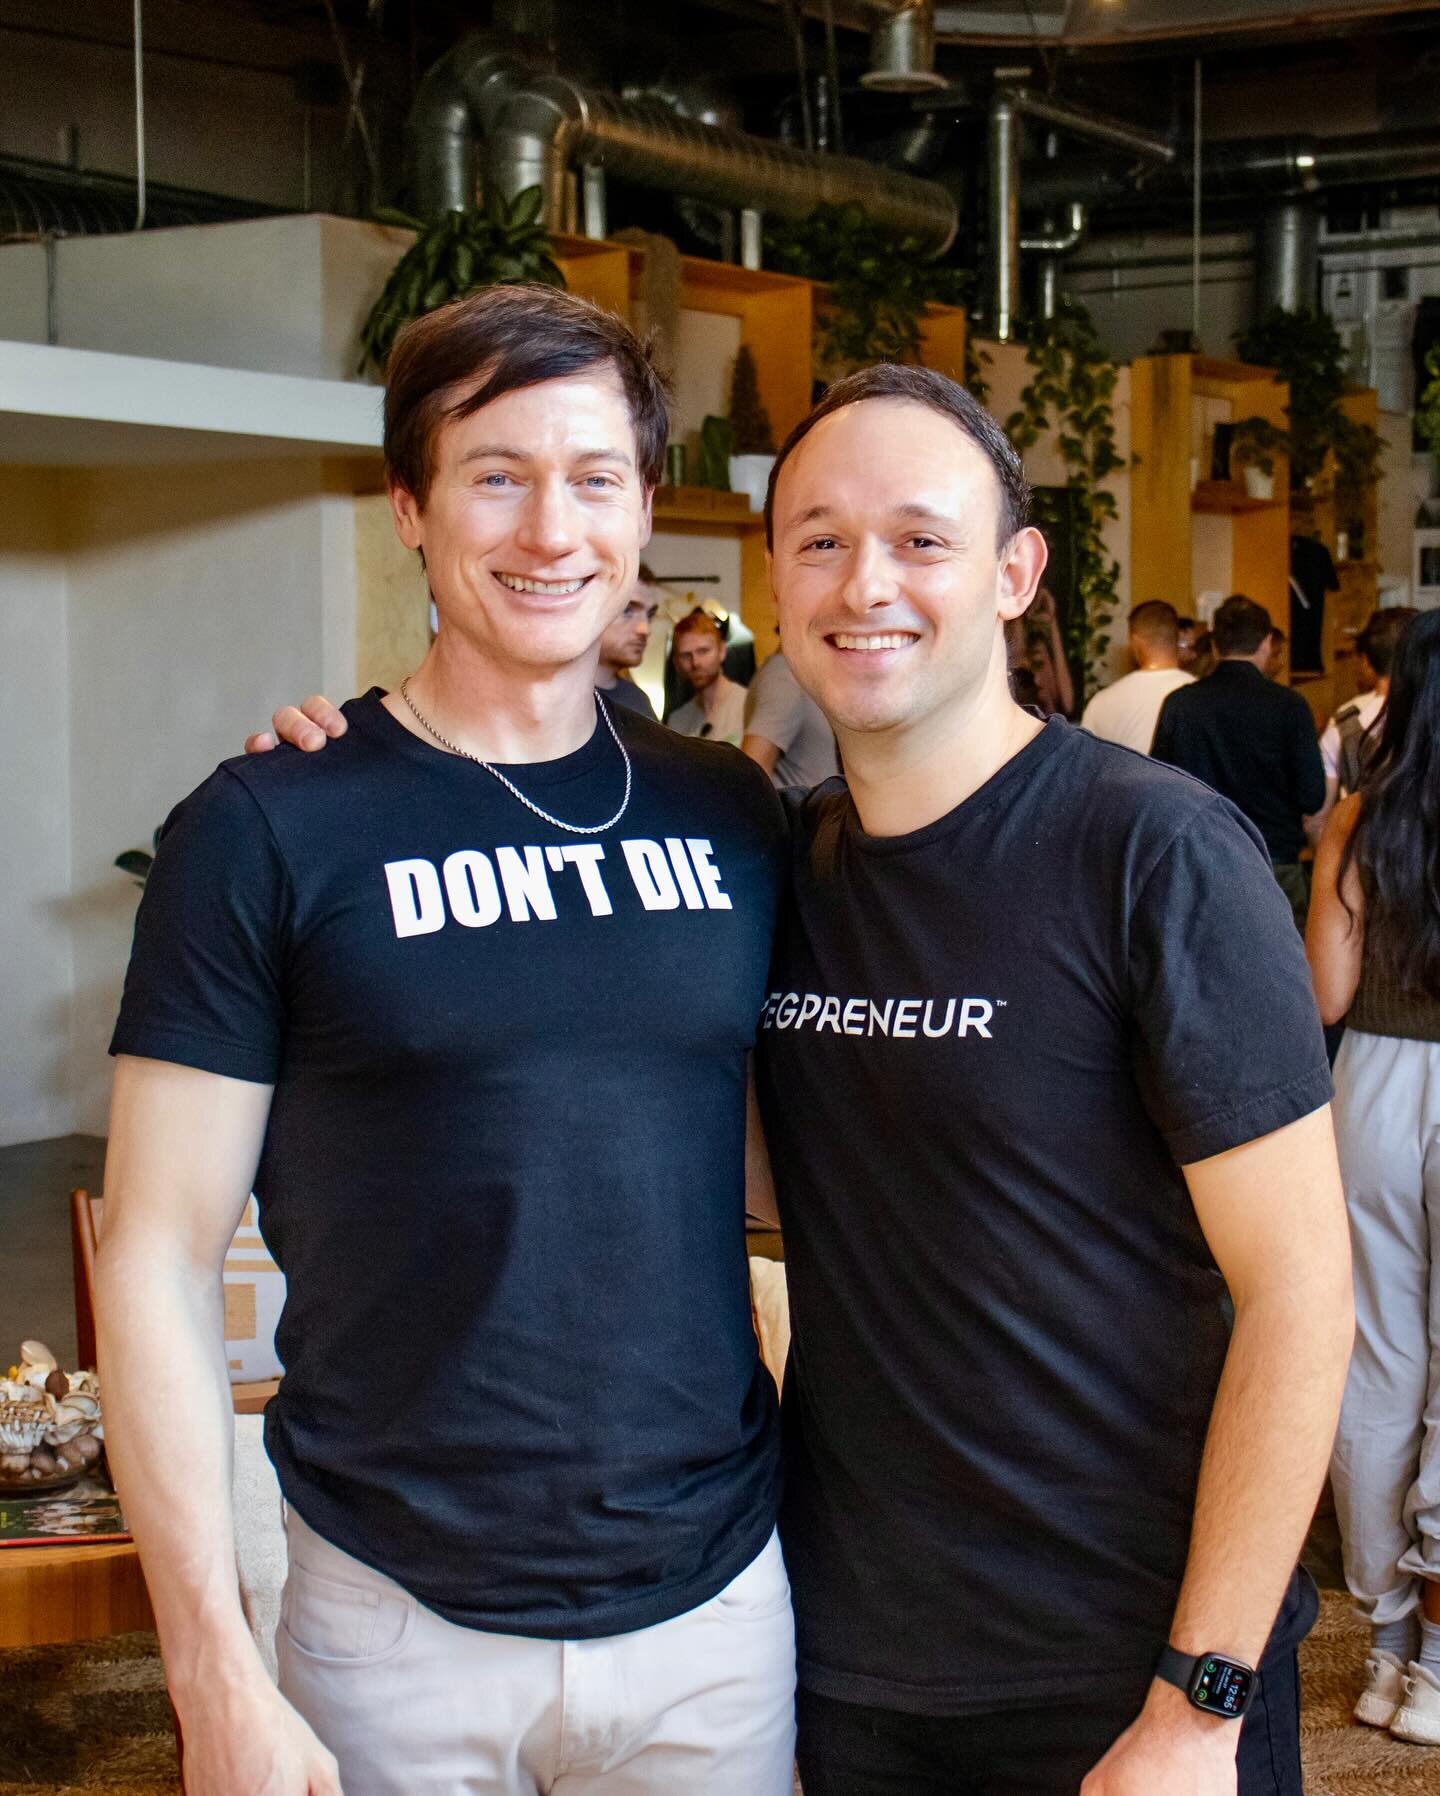 Thank you to everyone who joined us at @mudwtrgather to hear from @bryanjohnson_ of @blueprinteats last weekend in Los Angeles 🌴

#bryanjohnson #blueprint #mudwtr #longevity #rejuivinate #rejuvination #dontdie #entrepreneur